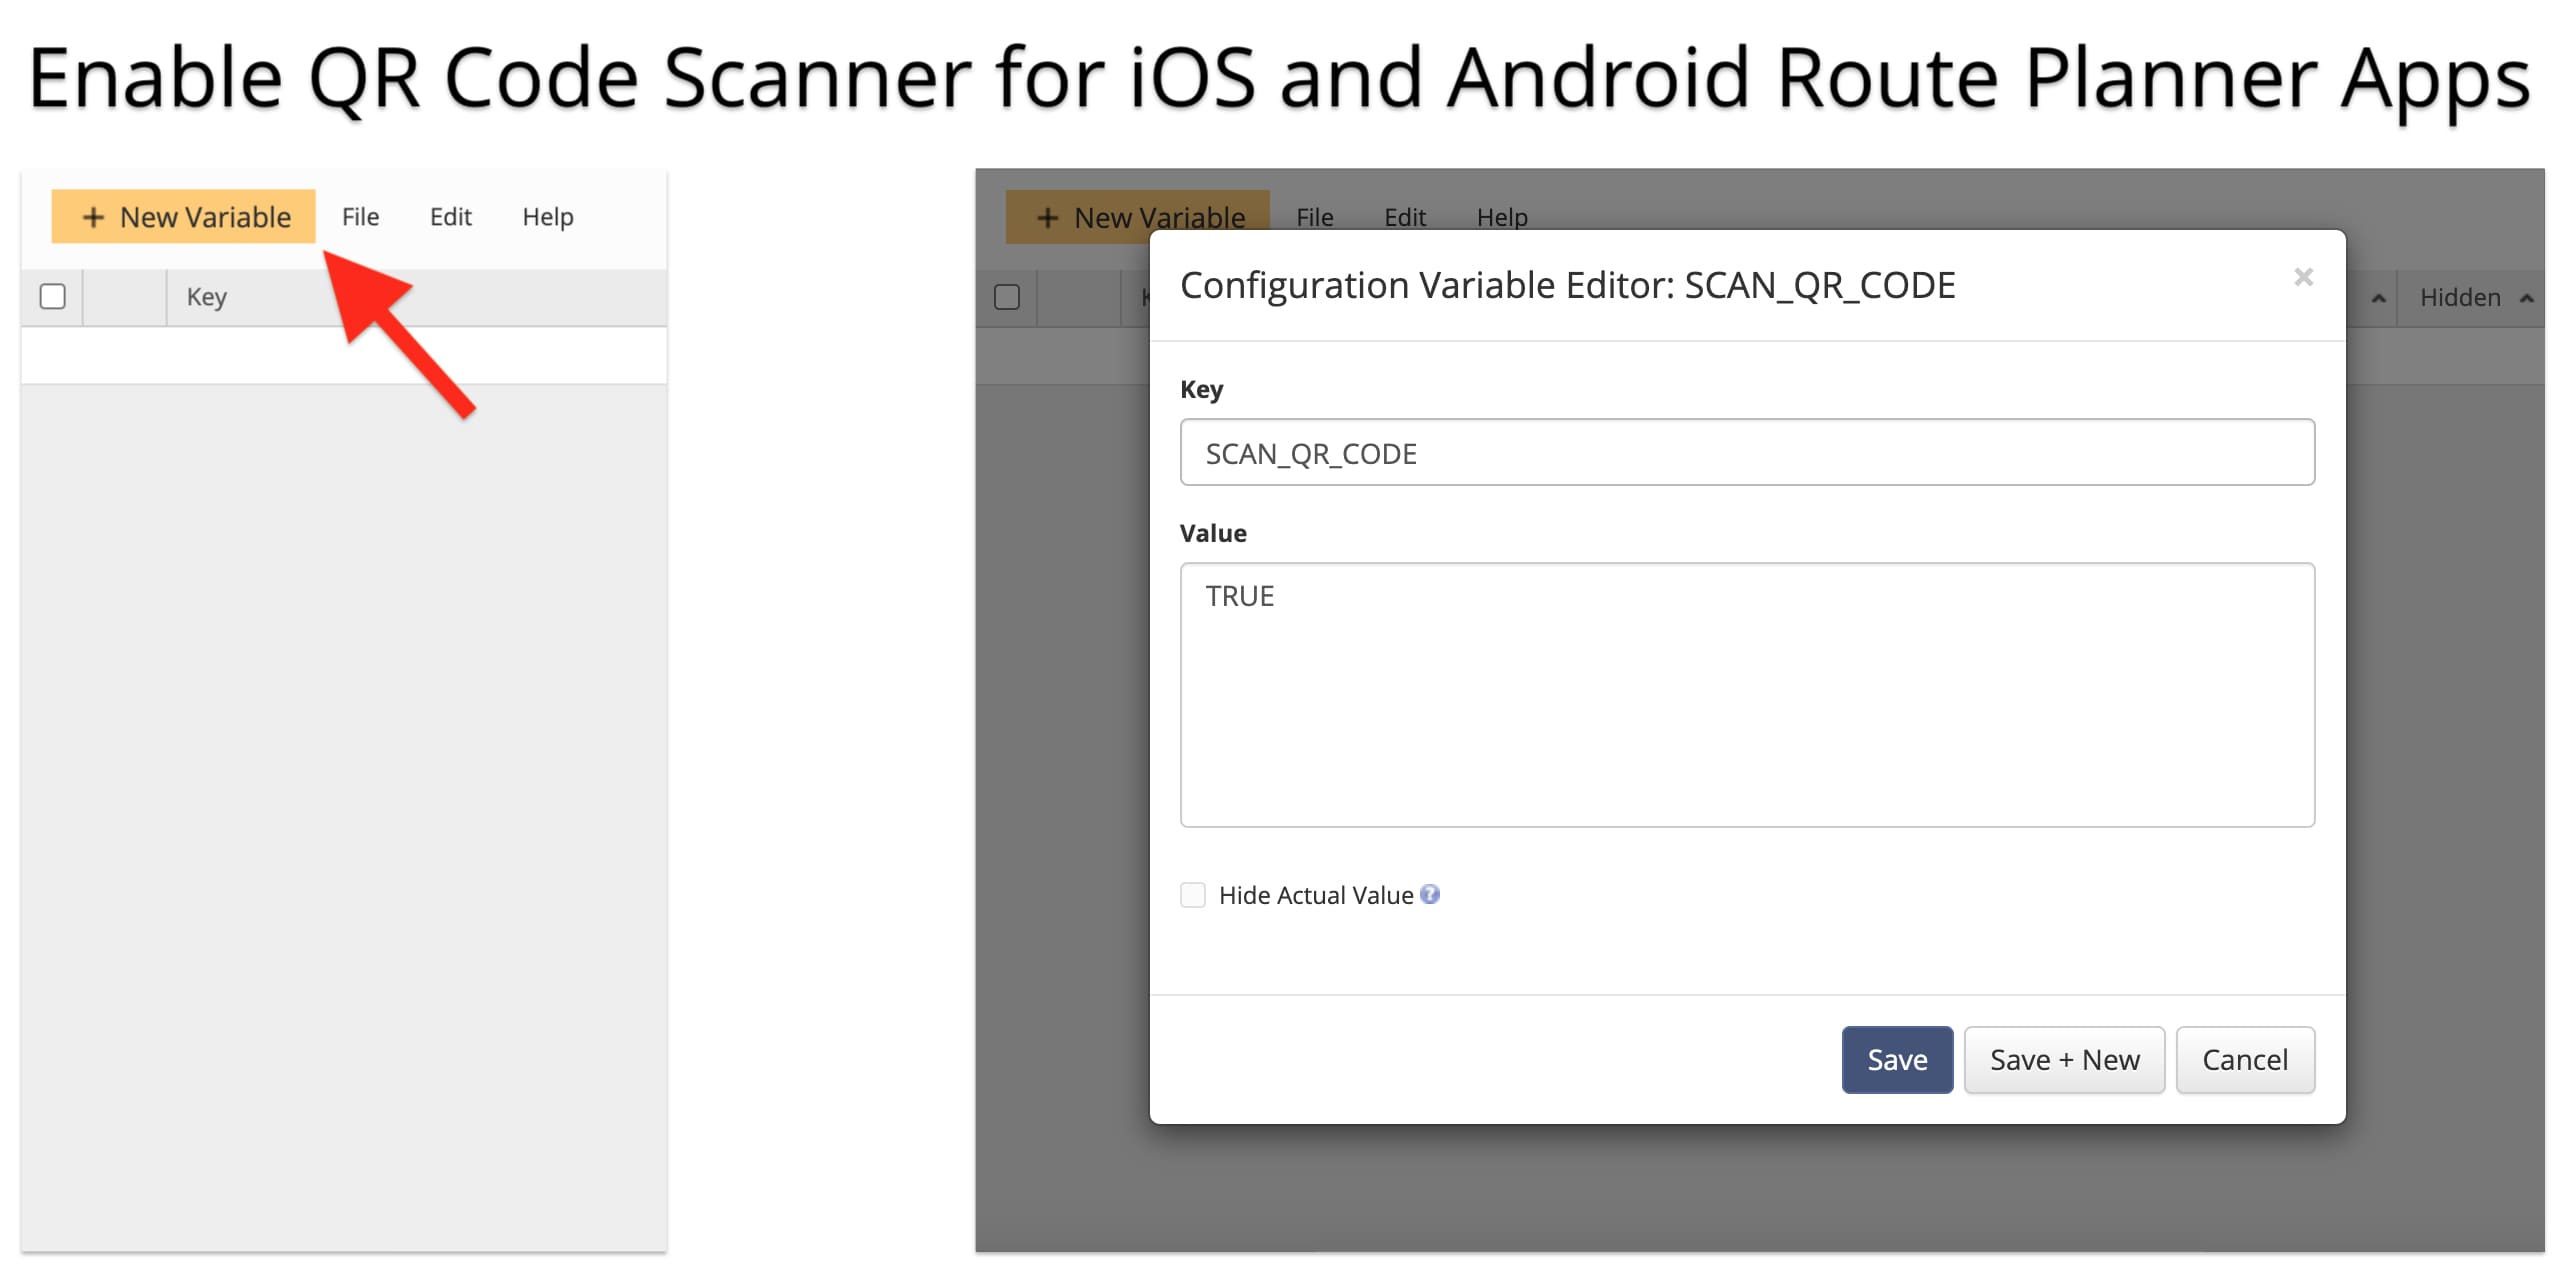 Enable QR Code scanner for mobile route planner apps to collect proof of delivery.